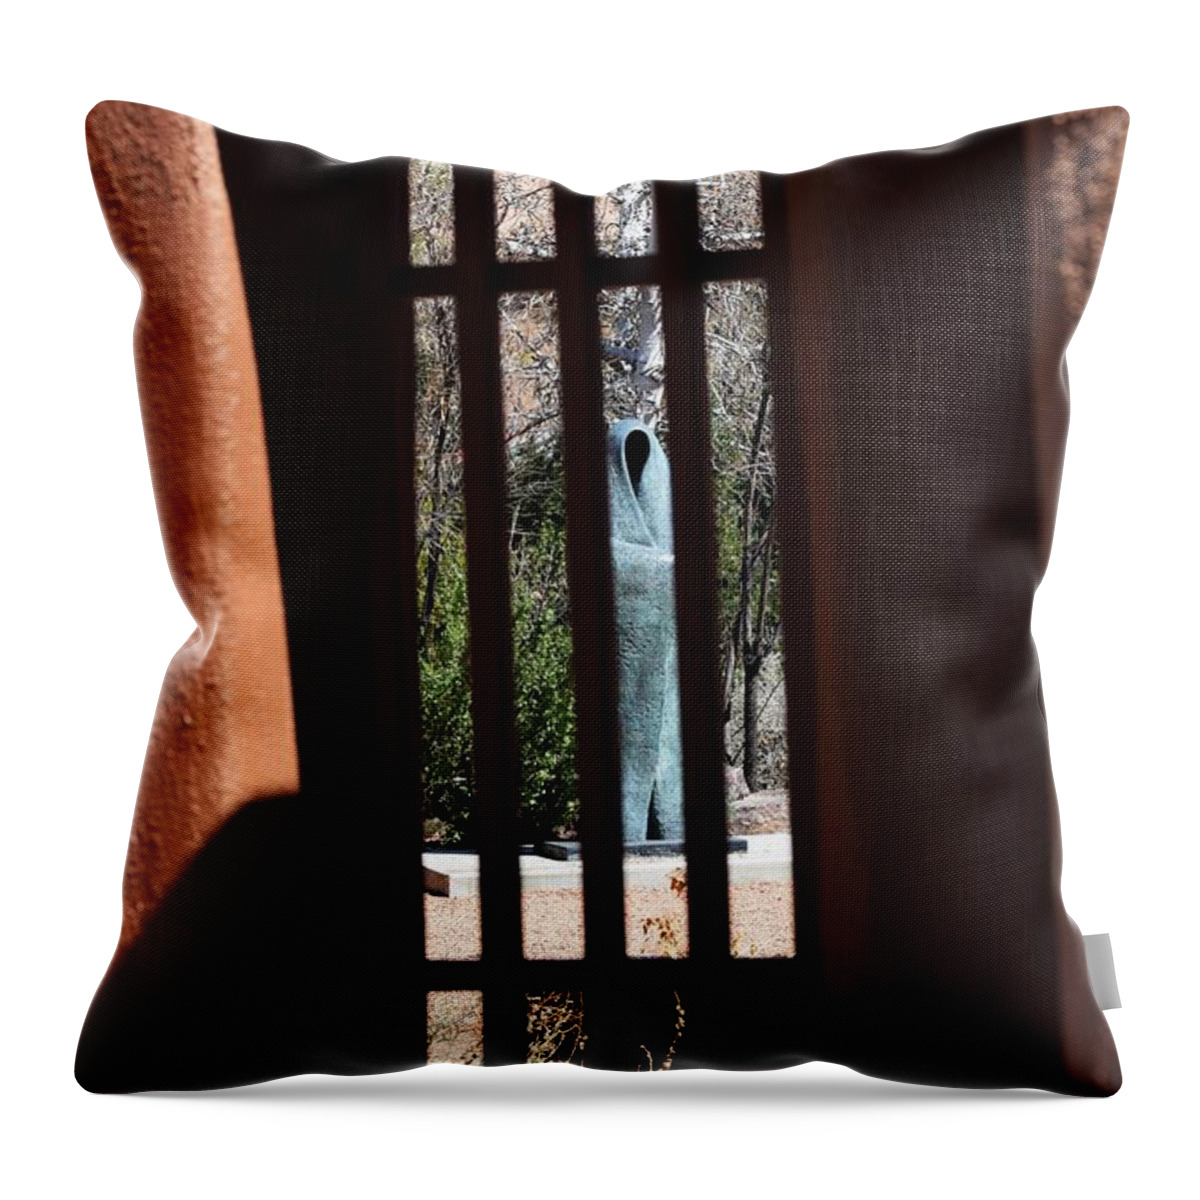 Santa Fe Culture Throw Pillow For Sale By John Glass